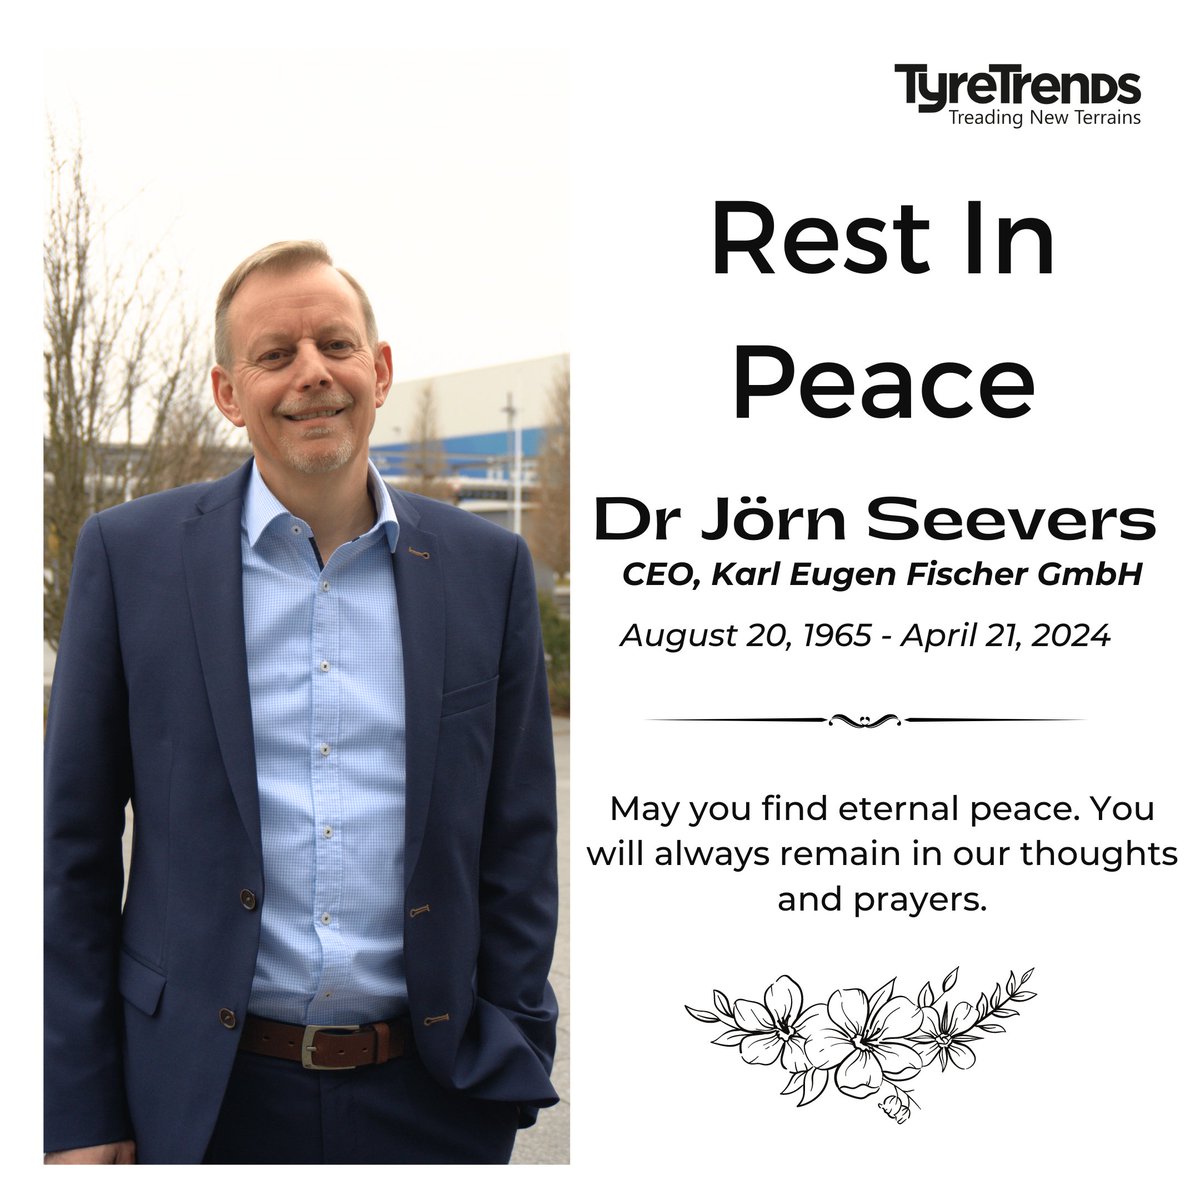 It is with profound sadness that we announce the passing of Dr. Joern Seevers, CEO of Karl Eugen Fischer GmbH. His presence brought light to our professional community, and his absence will be deeply felt. 

#restinpeace #industryleader